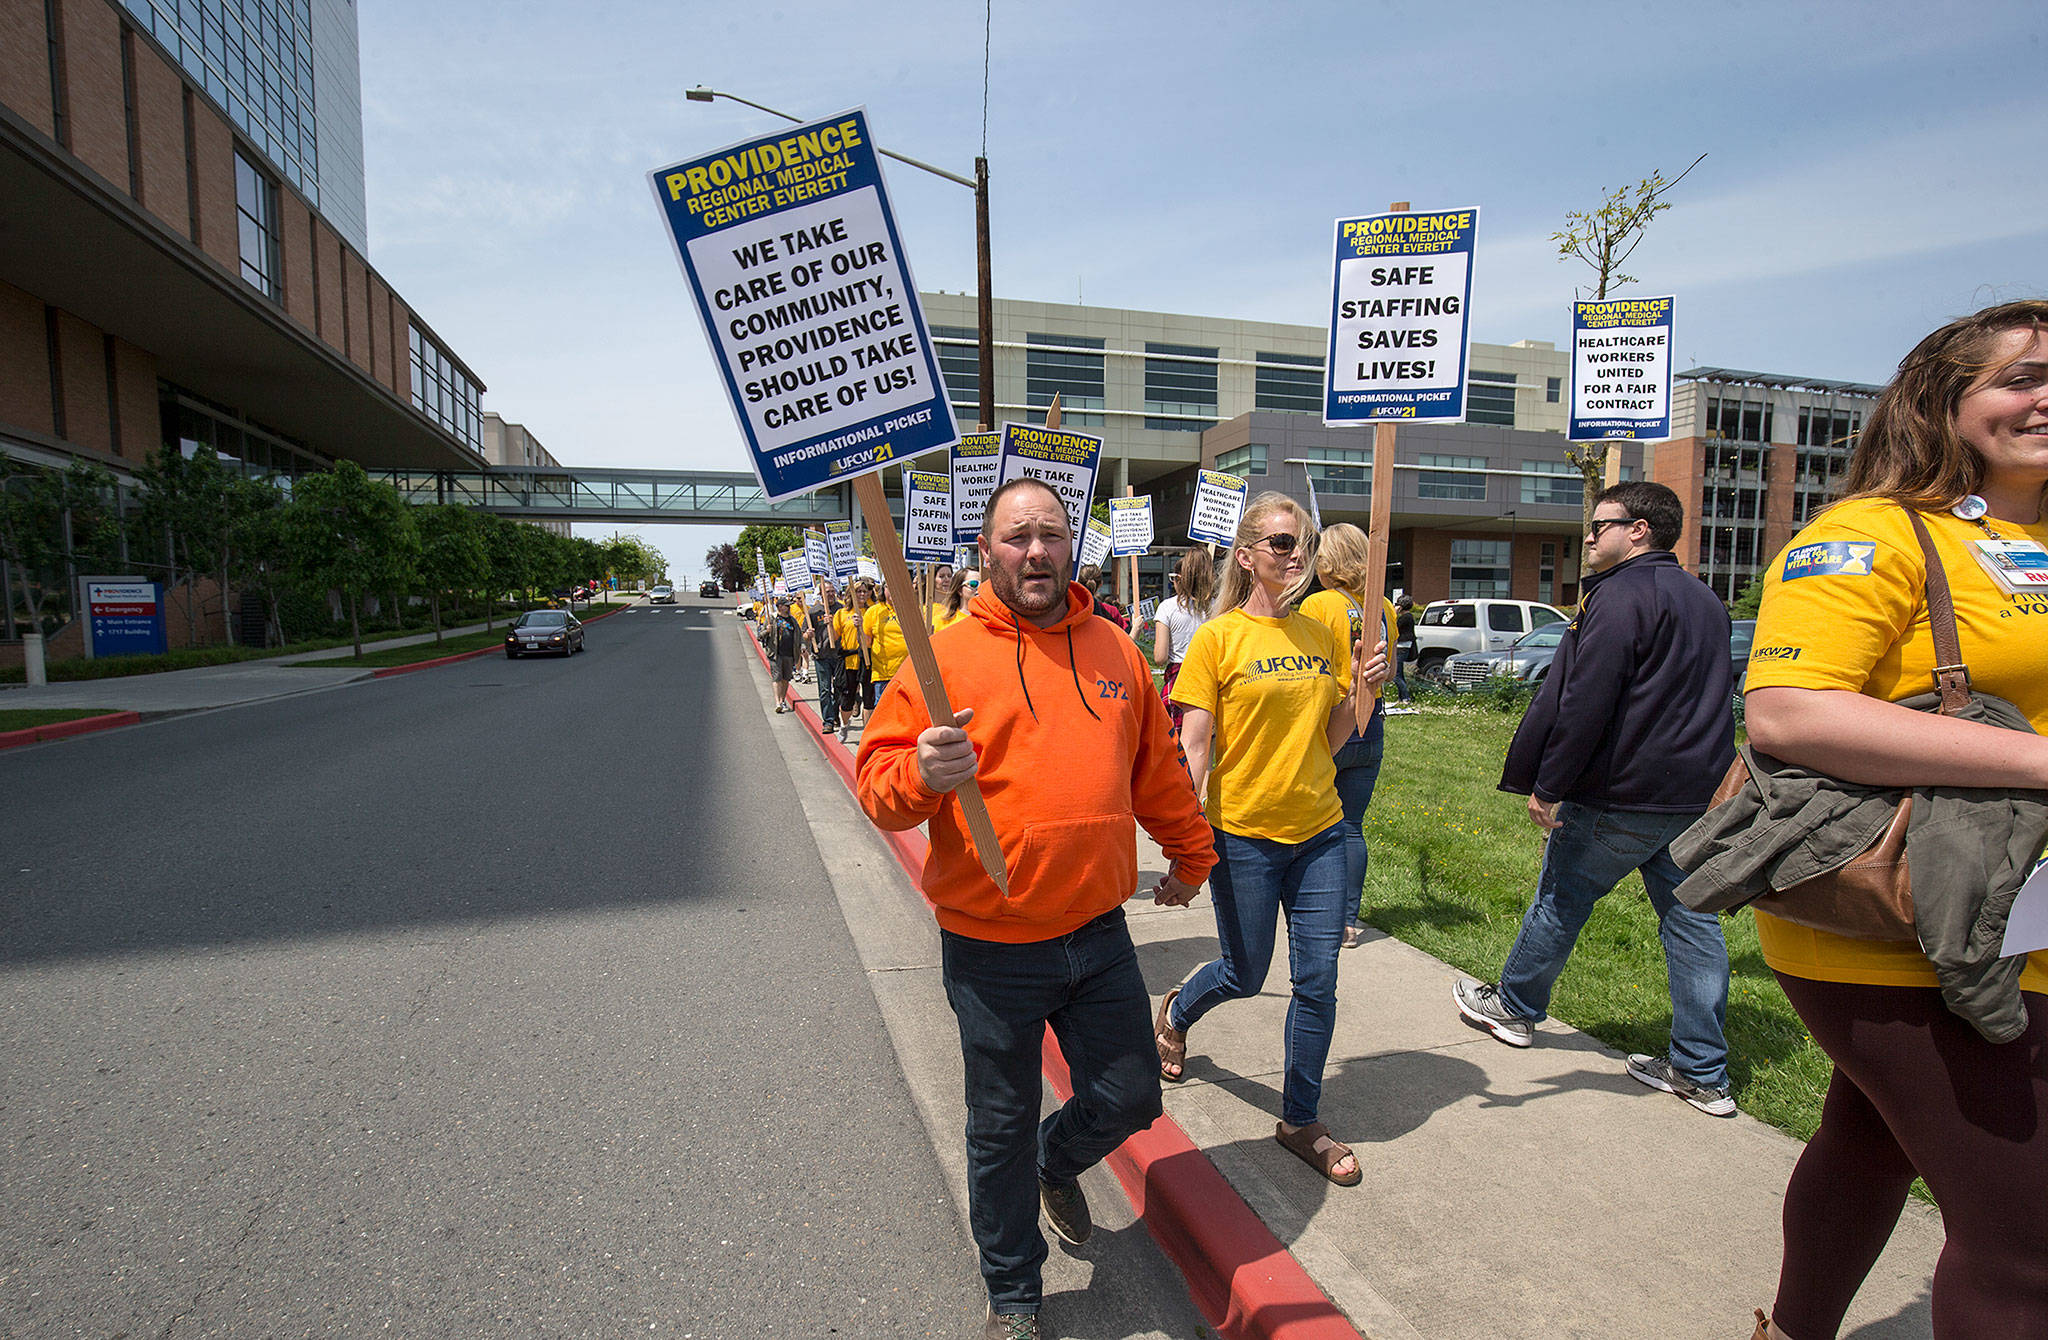 Nurse Katy Roth and her husband, Rod, a union member with Labor Local 292, walk with other nurses on a picket line at Providence Regional Medical Center Everett on Wednesday. (Andy Bronson / The Herald)